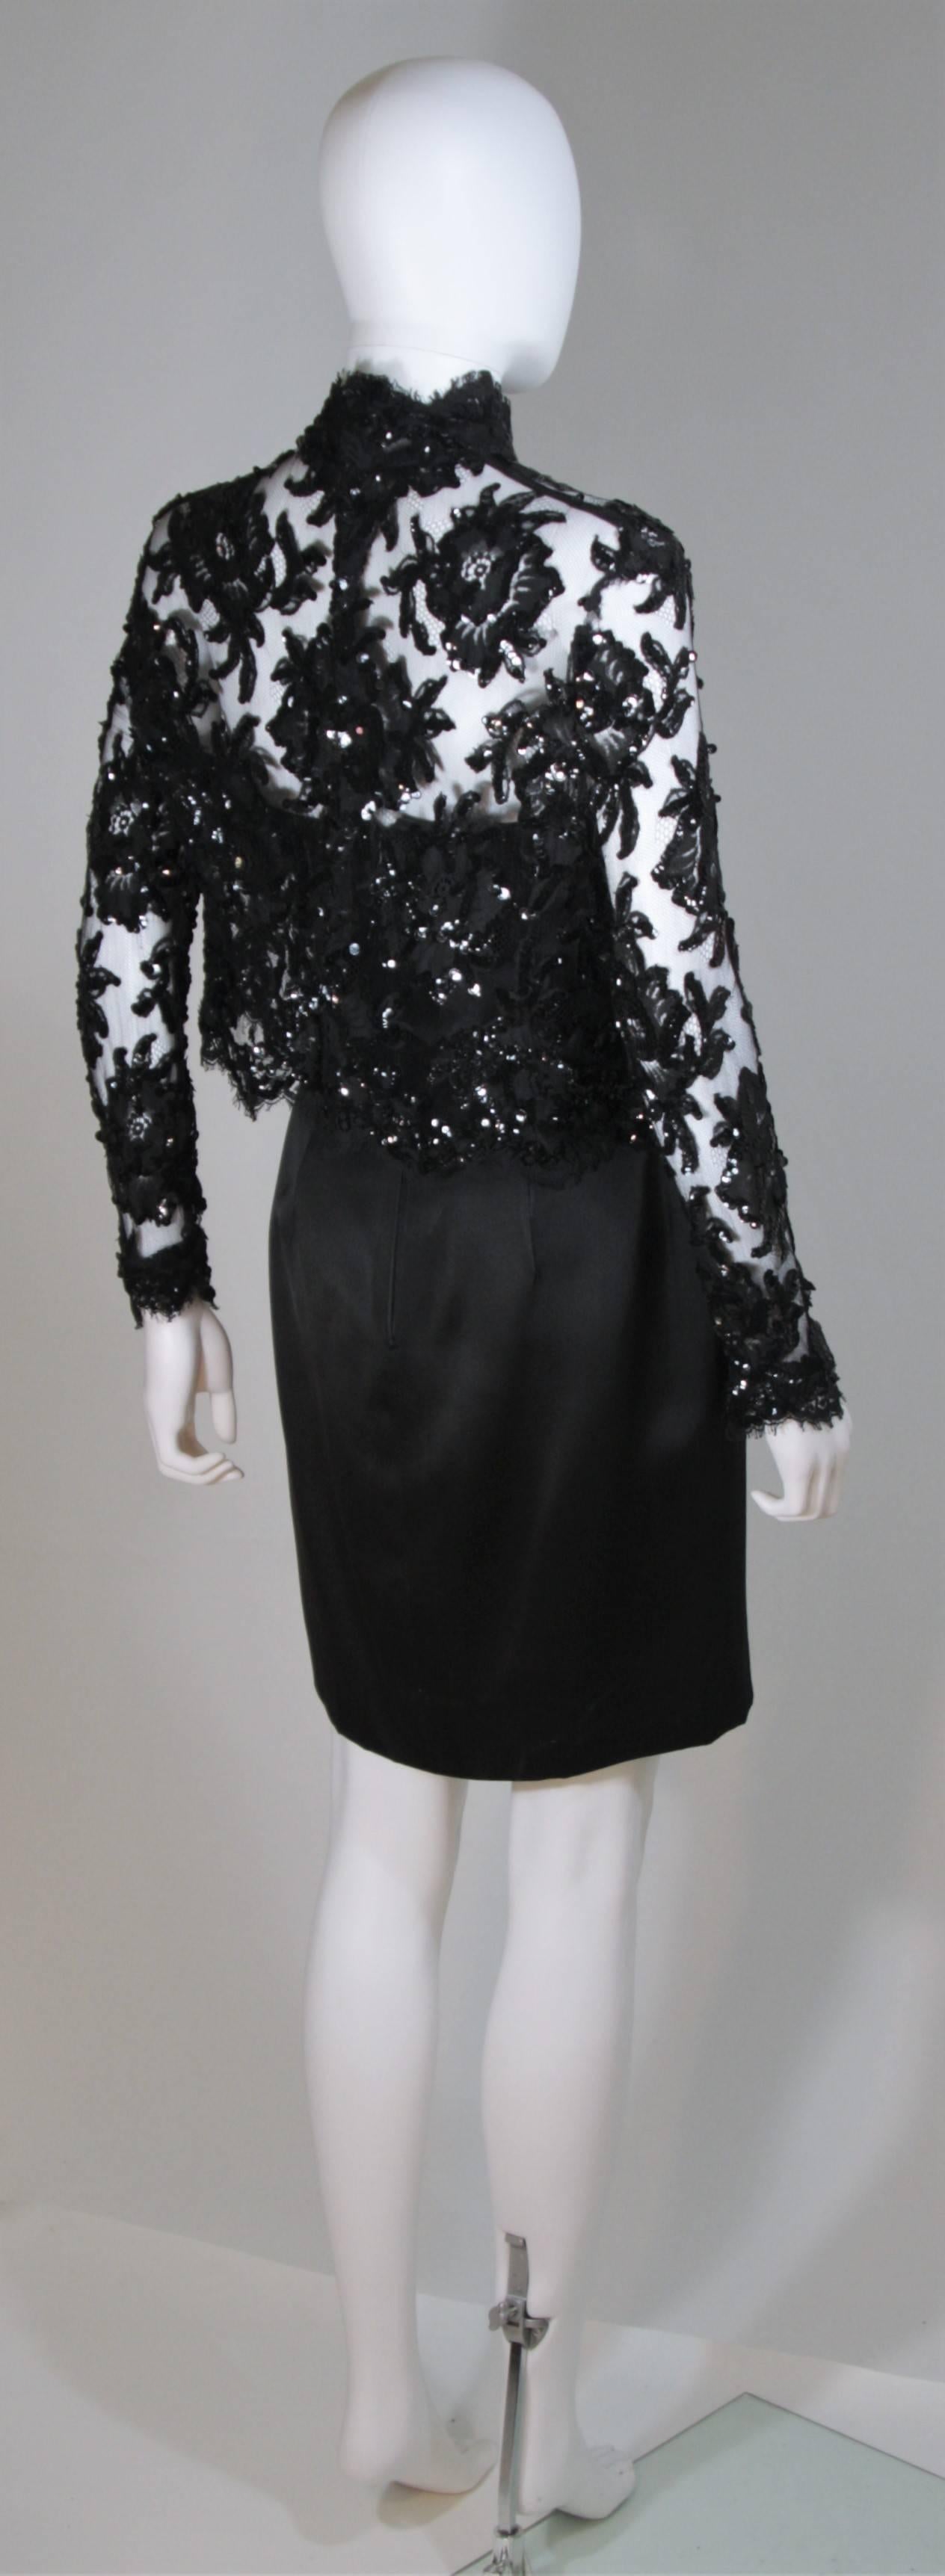 PATRICK KELLY Circa 1980's Black Sequin Lace Blouse and Cocktail Dress Size 4 1